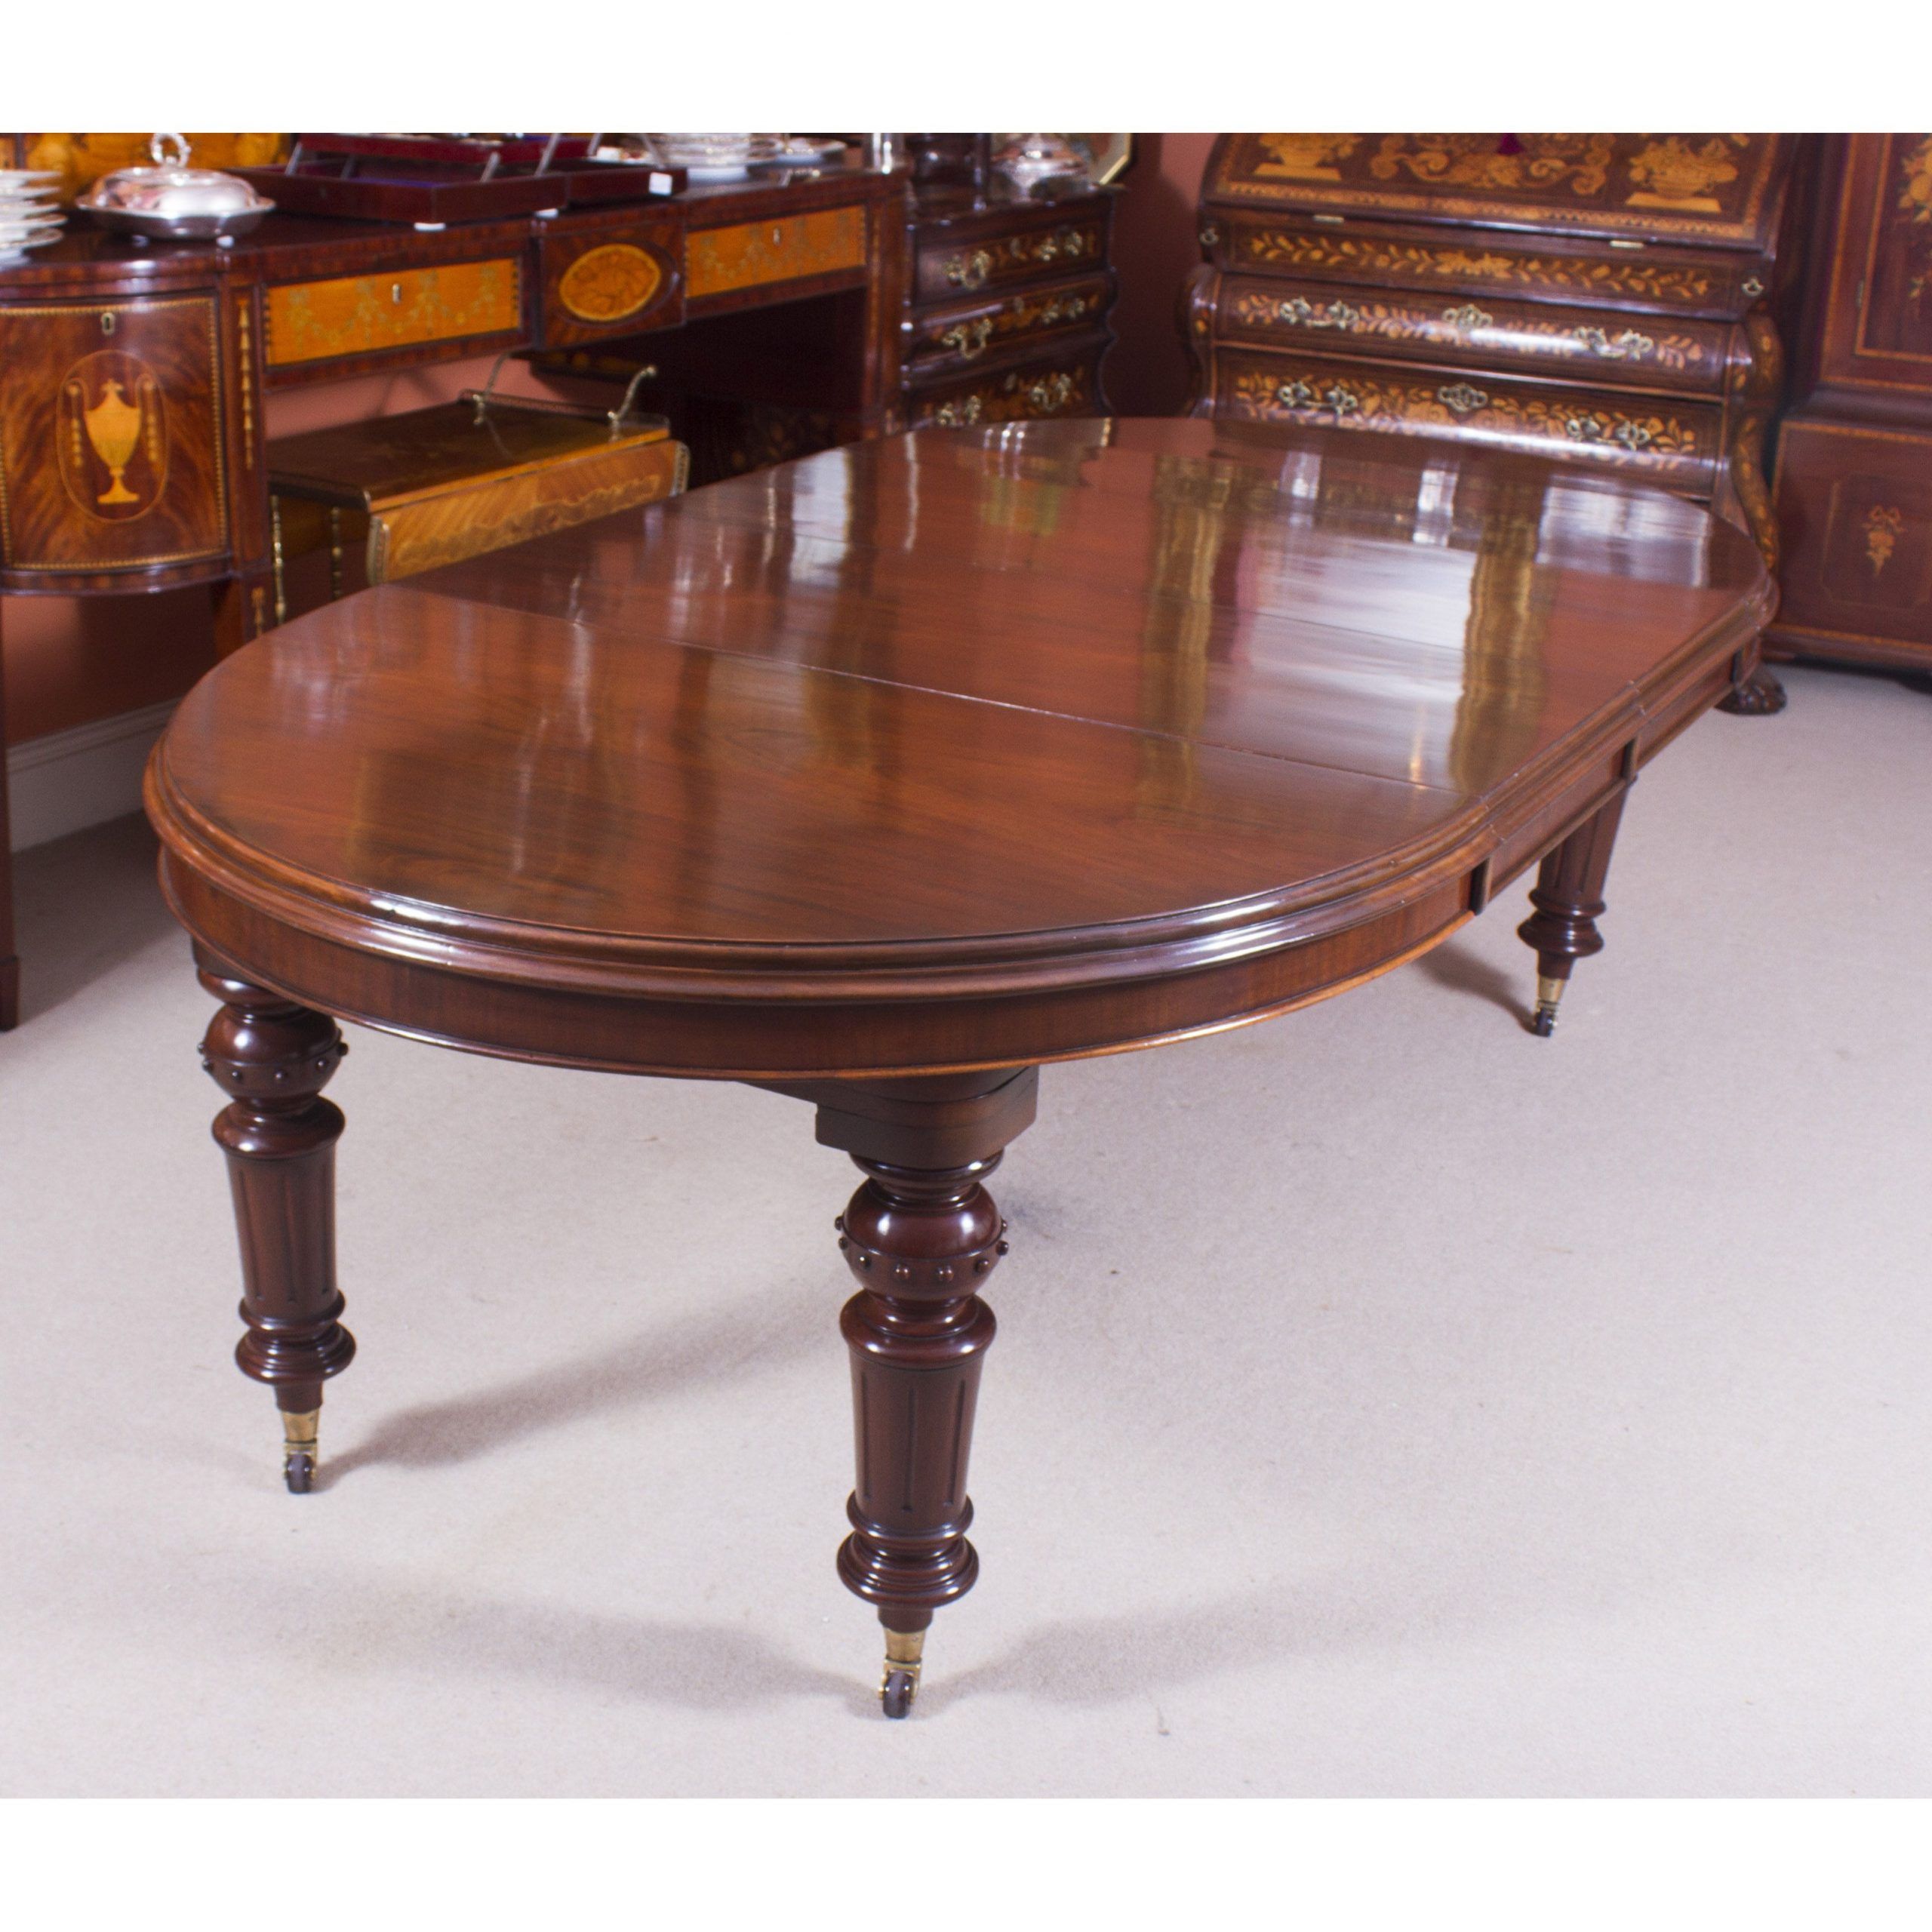 Popular Rustic Mahogany Extending Dining Tables Pertaining To Antique 8Ft Victorian Oval Extending Dining Table C (View 7 of 25)